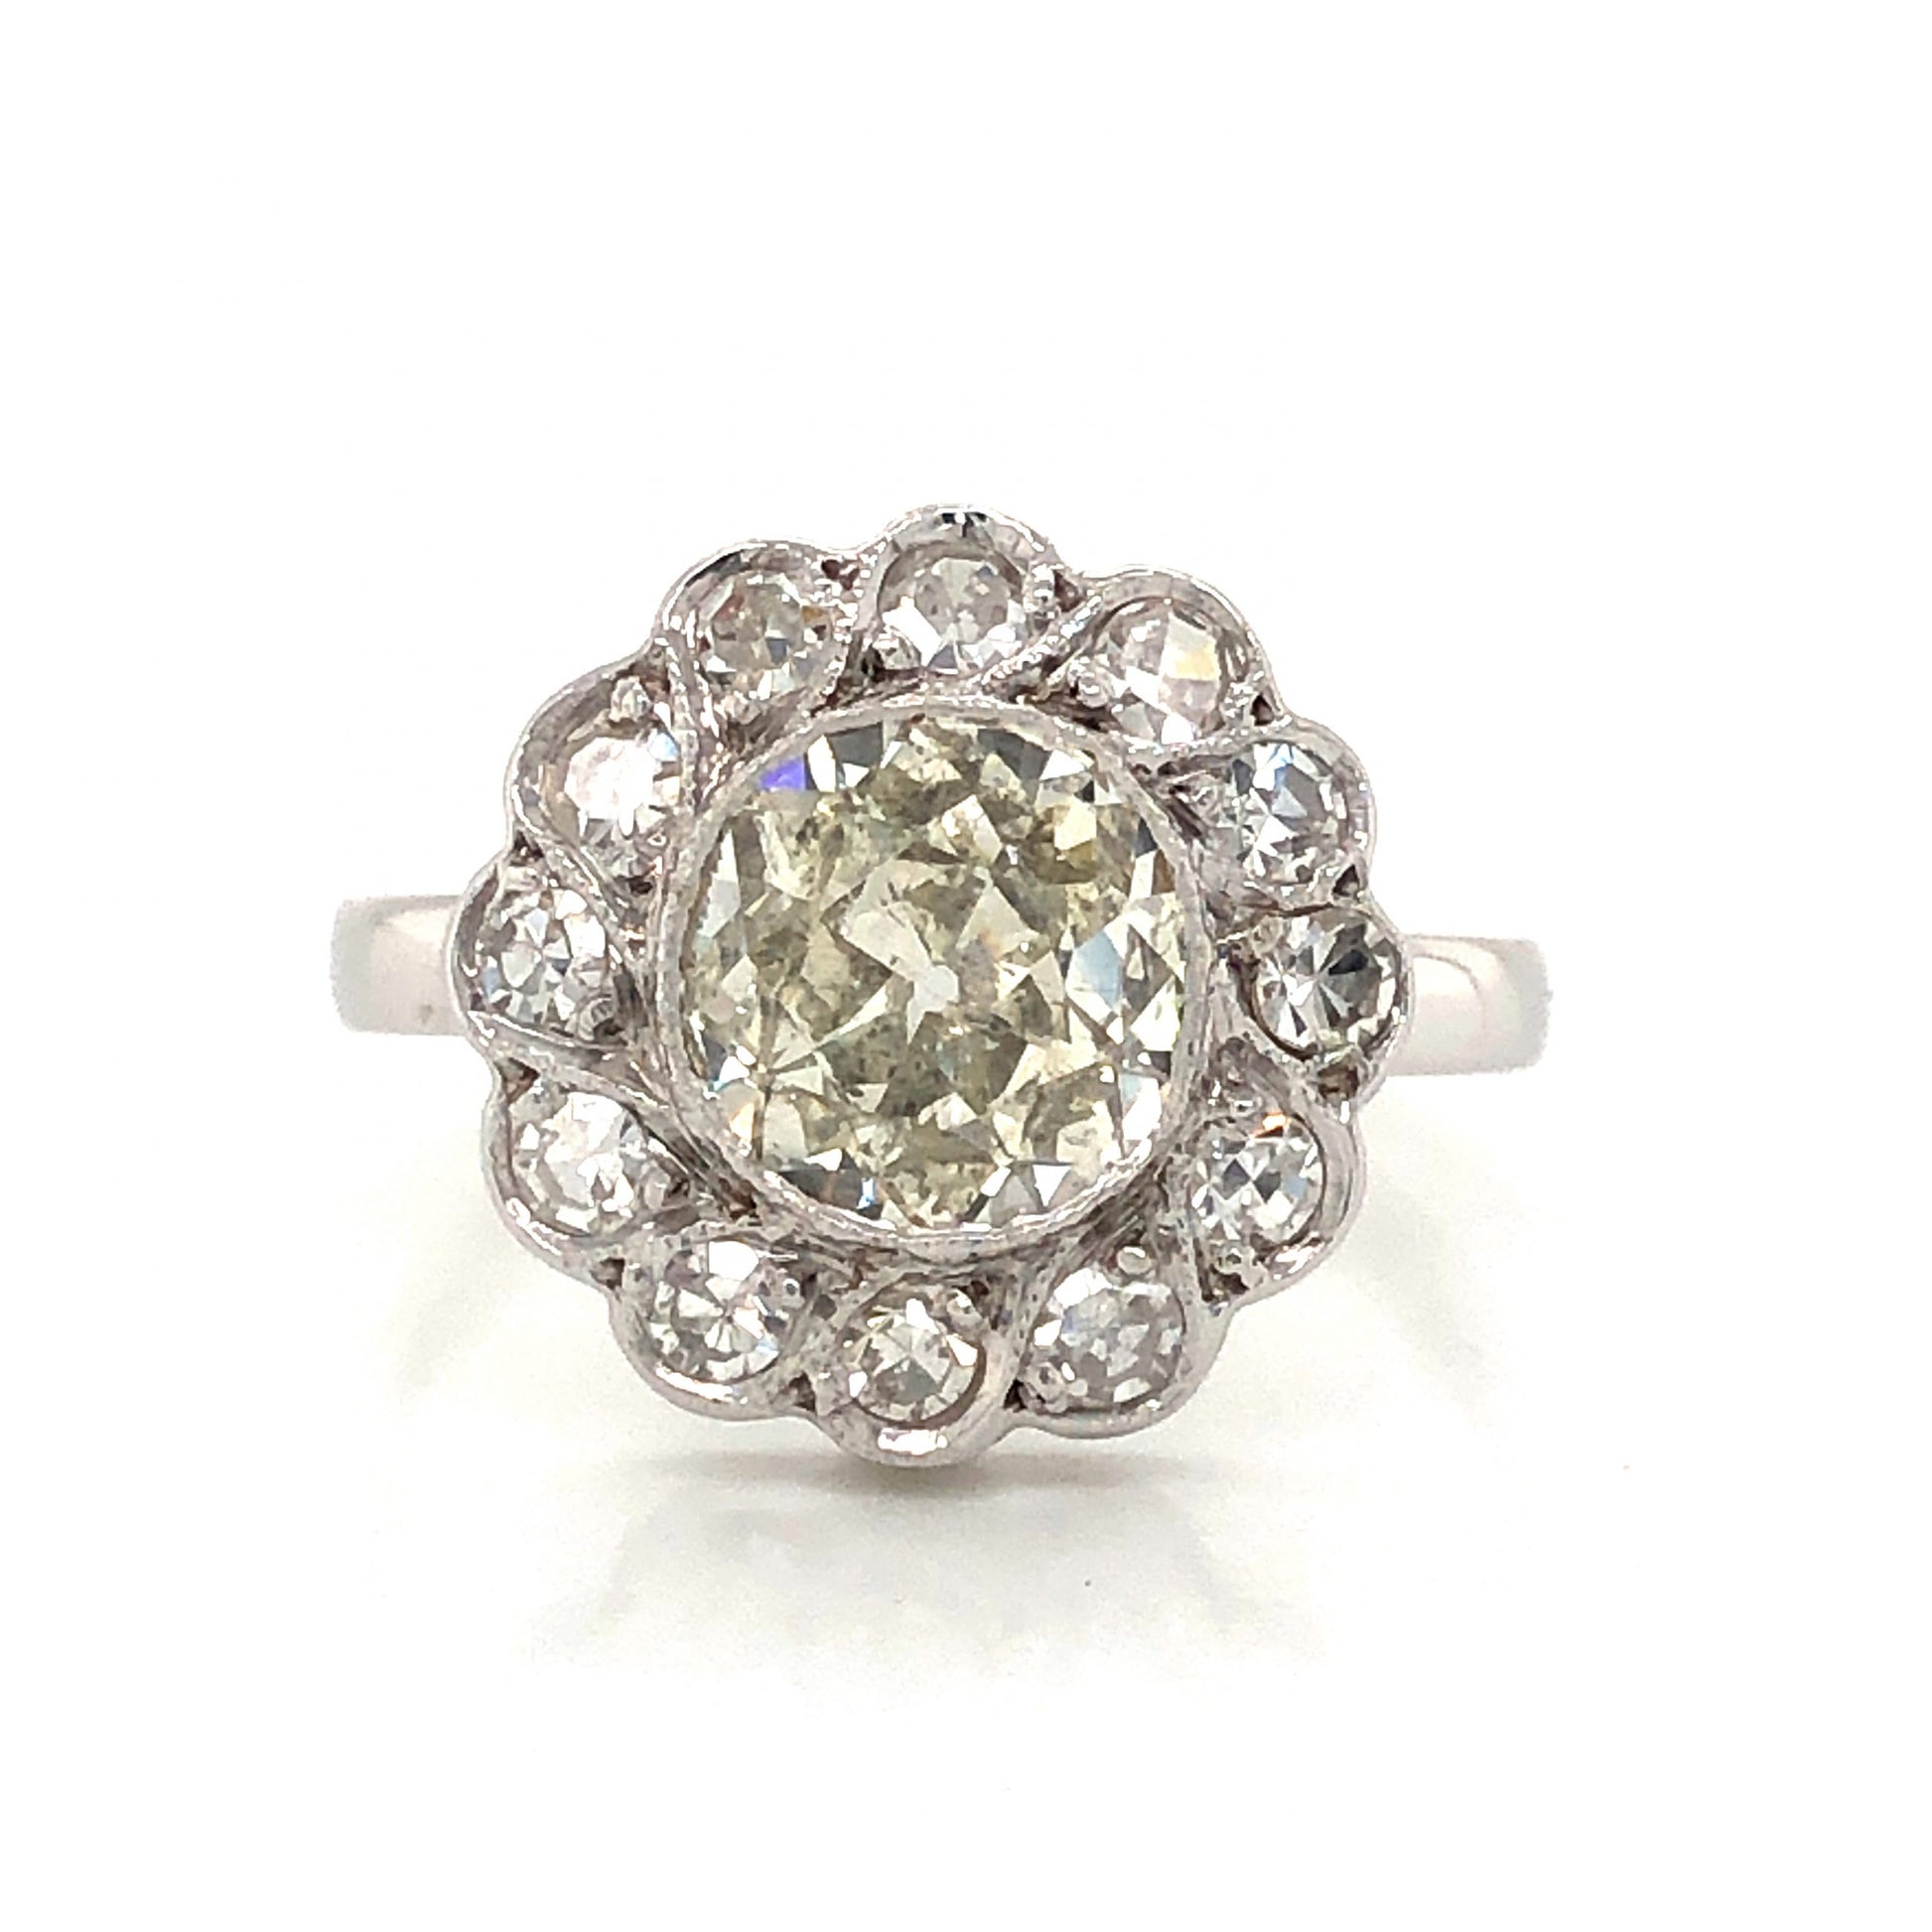 Art Deco Floral Diamond Cluster Engagement Ring in 14k White GoldComposition: 14 Karat White Gold Ring Size: 6 Total Diamond Weight: 1.48ct Total Gram Weight: 2.4 g